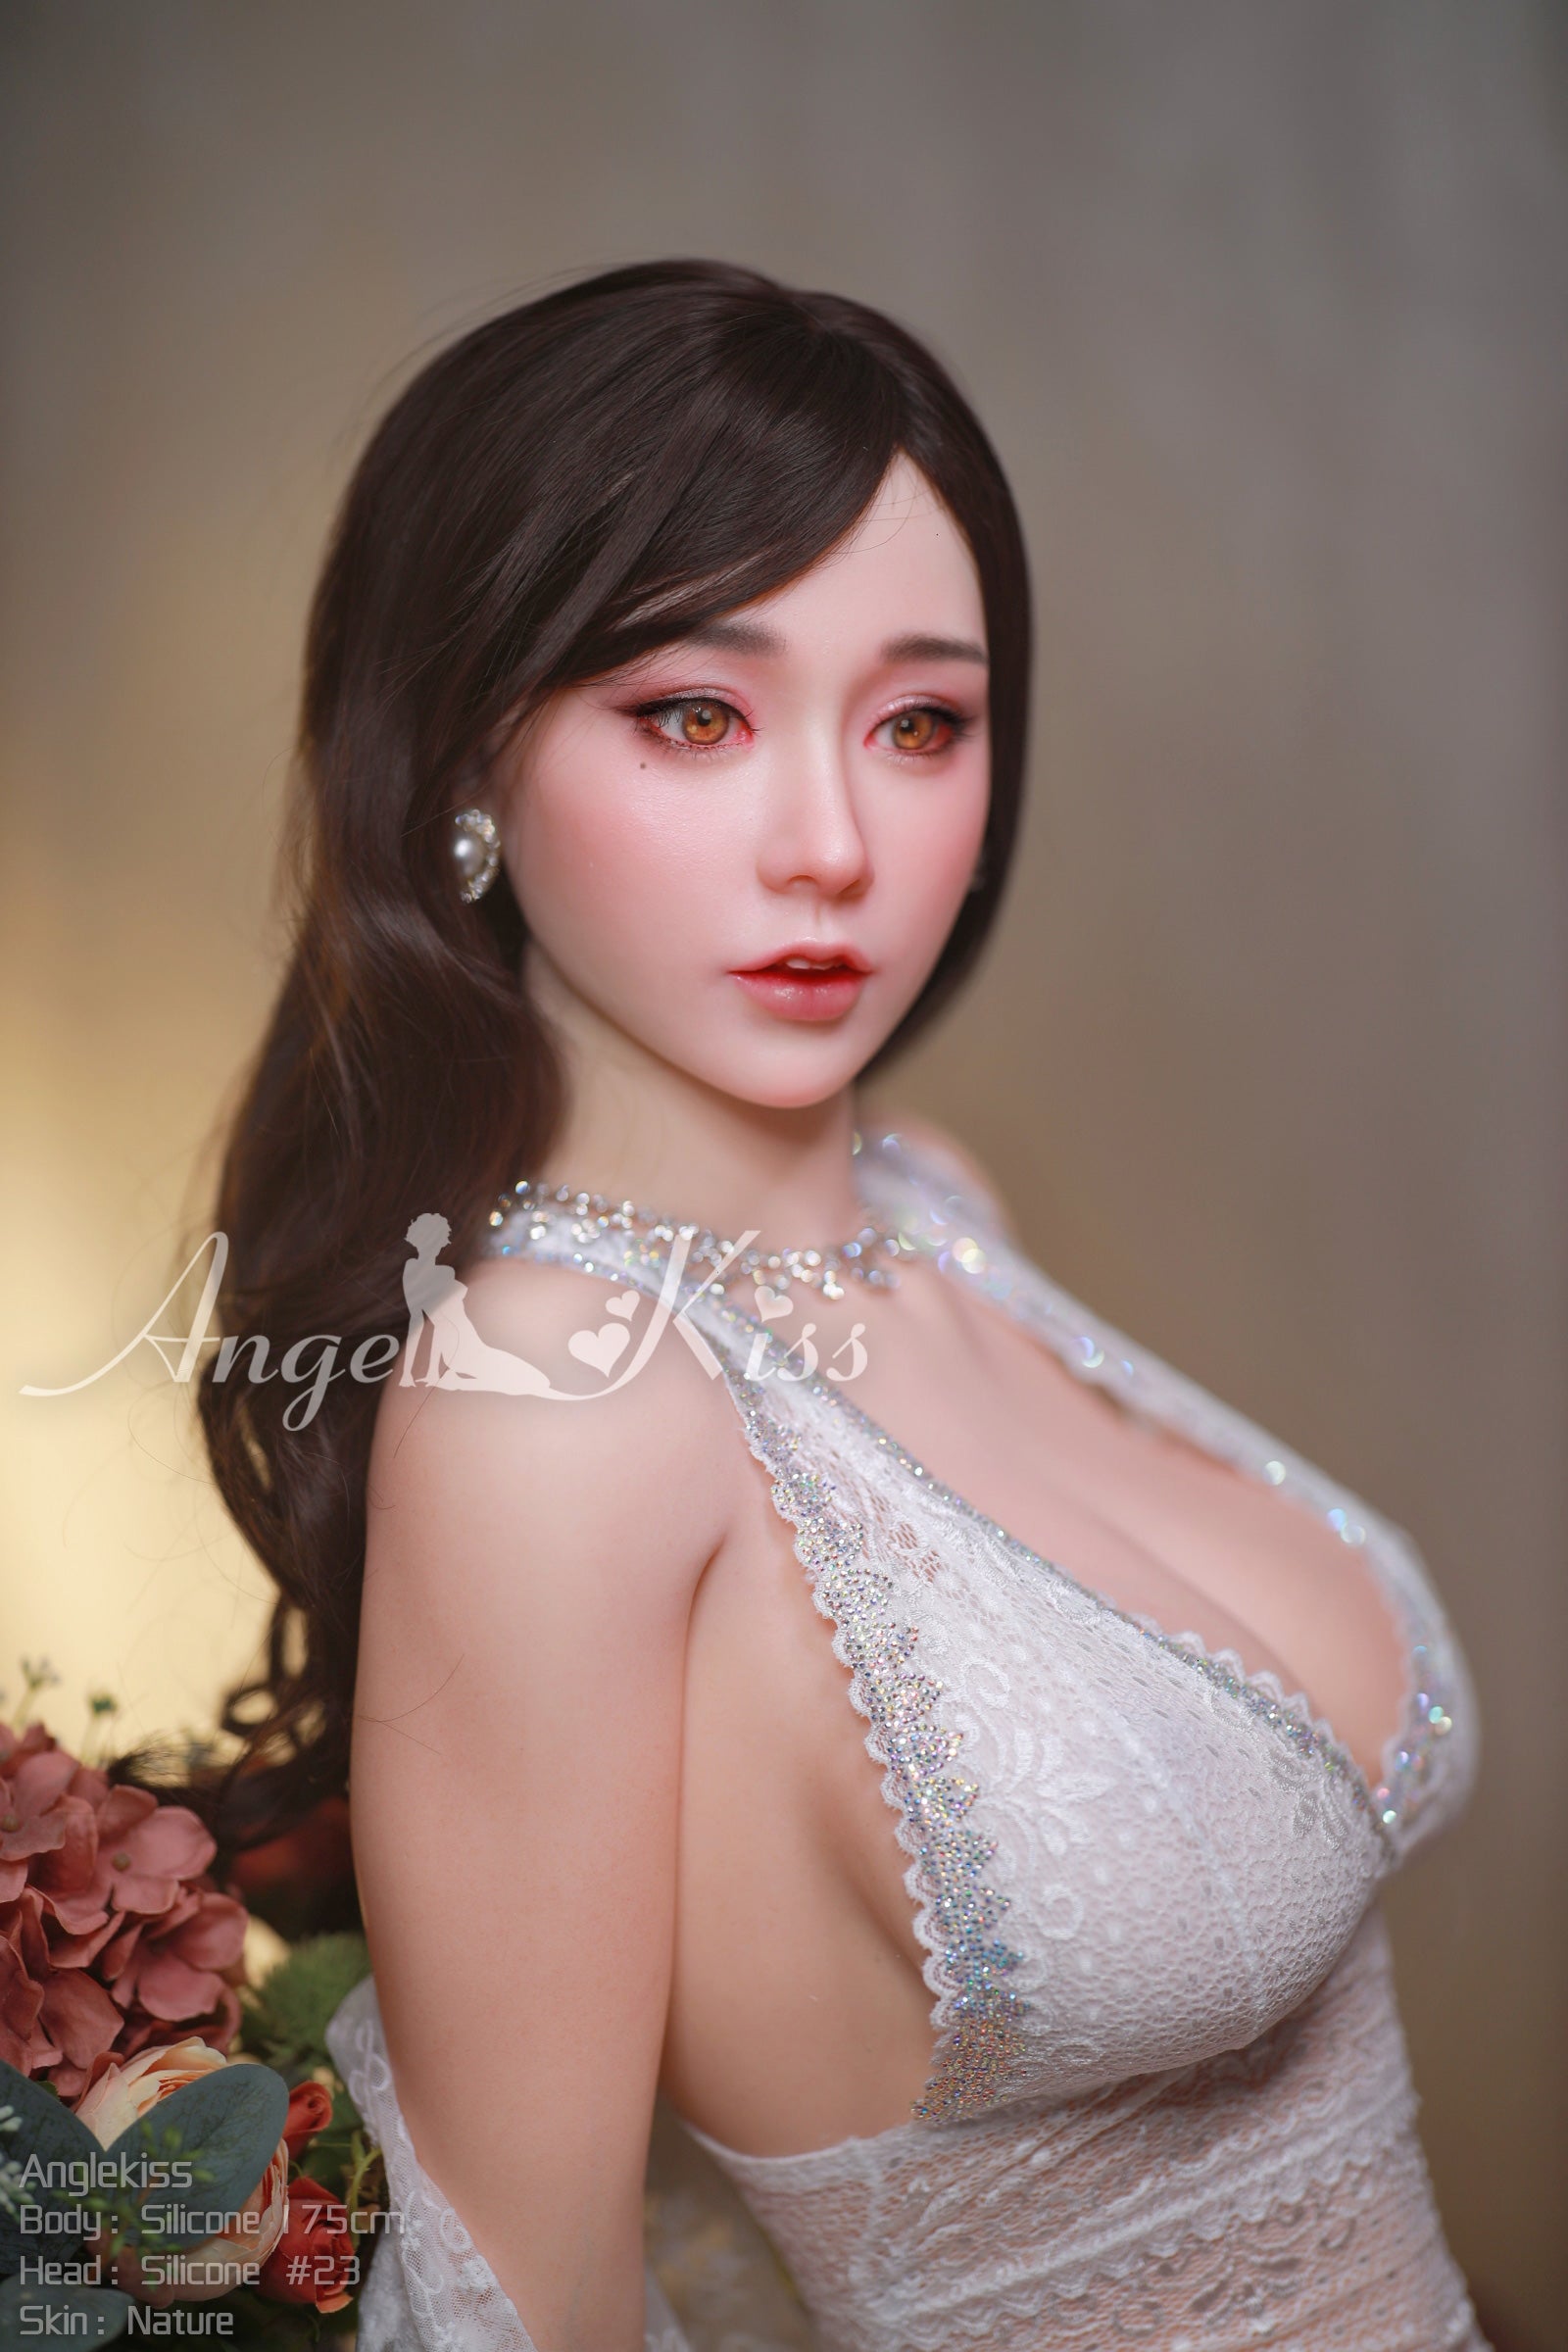 Angelkiss Doll 175 cm Silicone - Sora | Buy Sex Dolls at DOLLS ACTUALLY